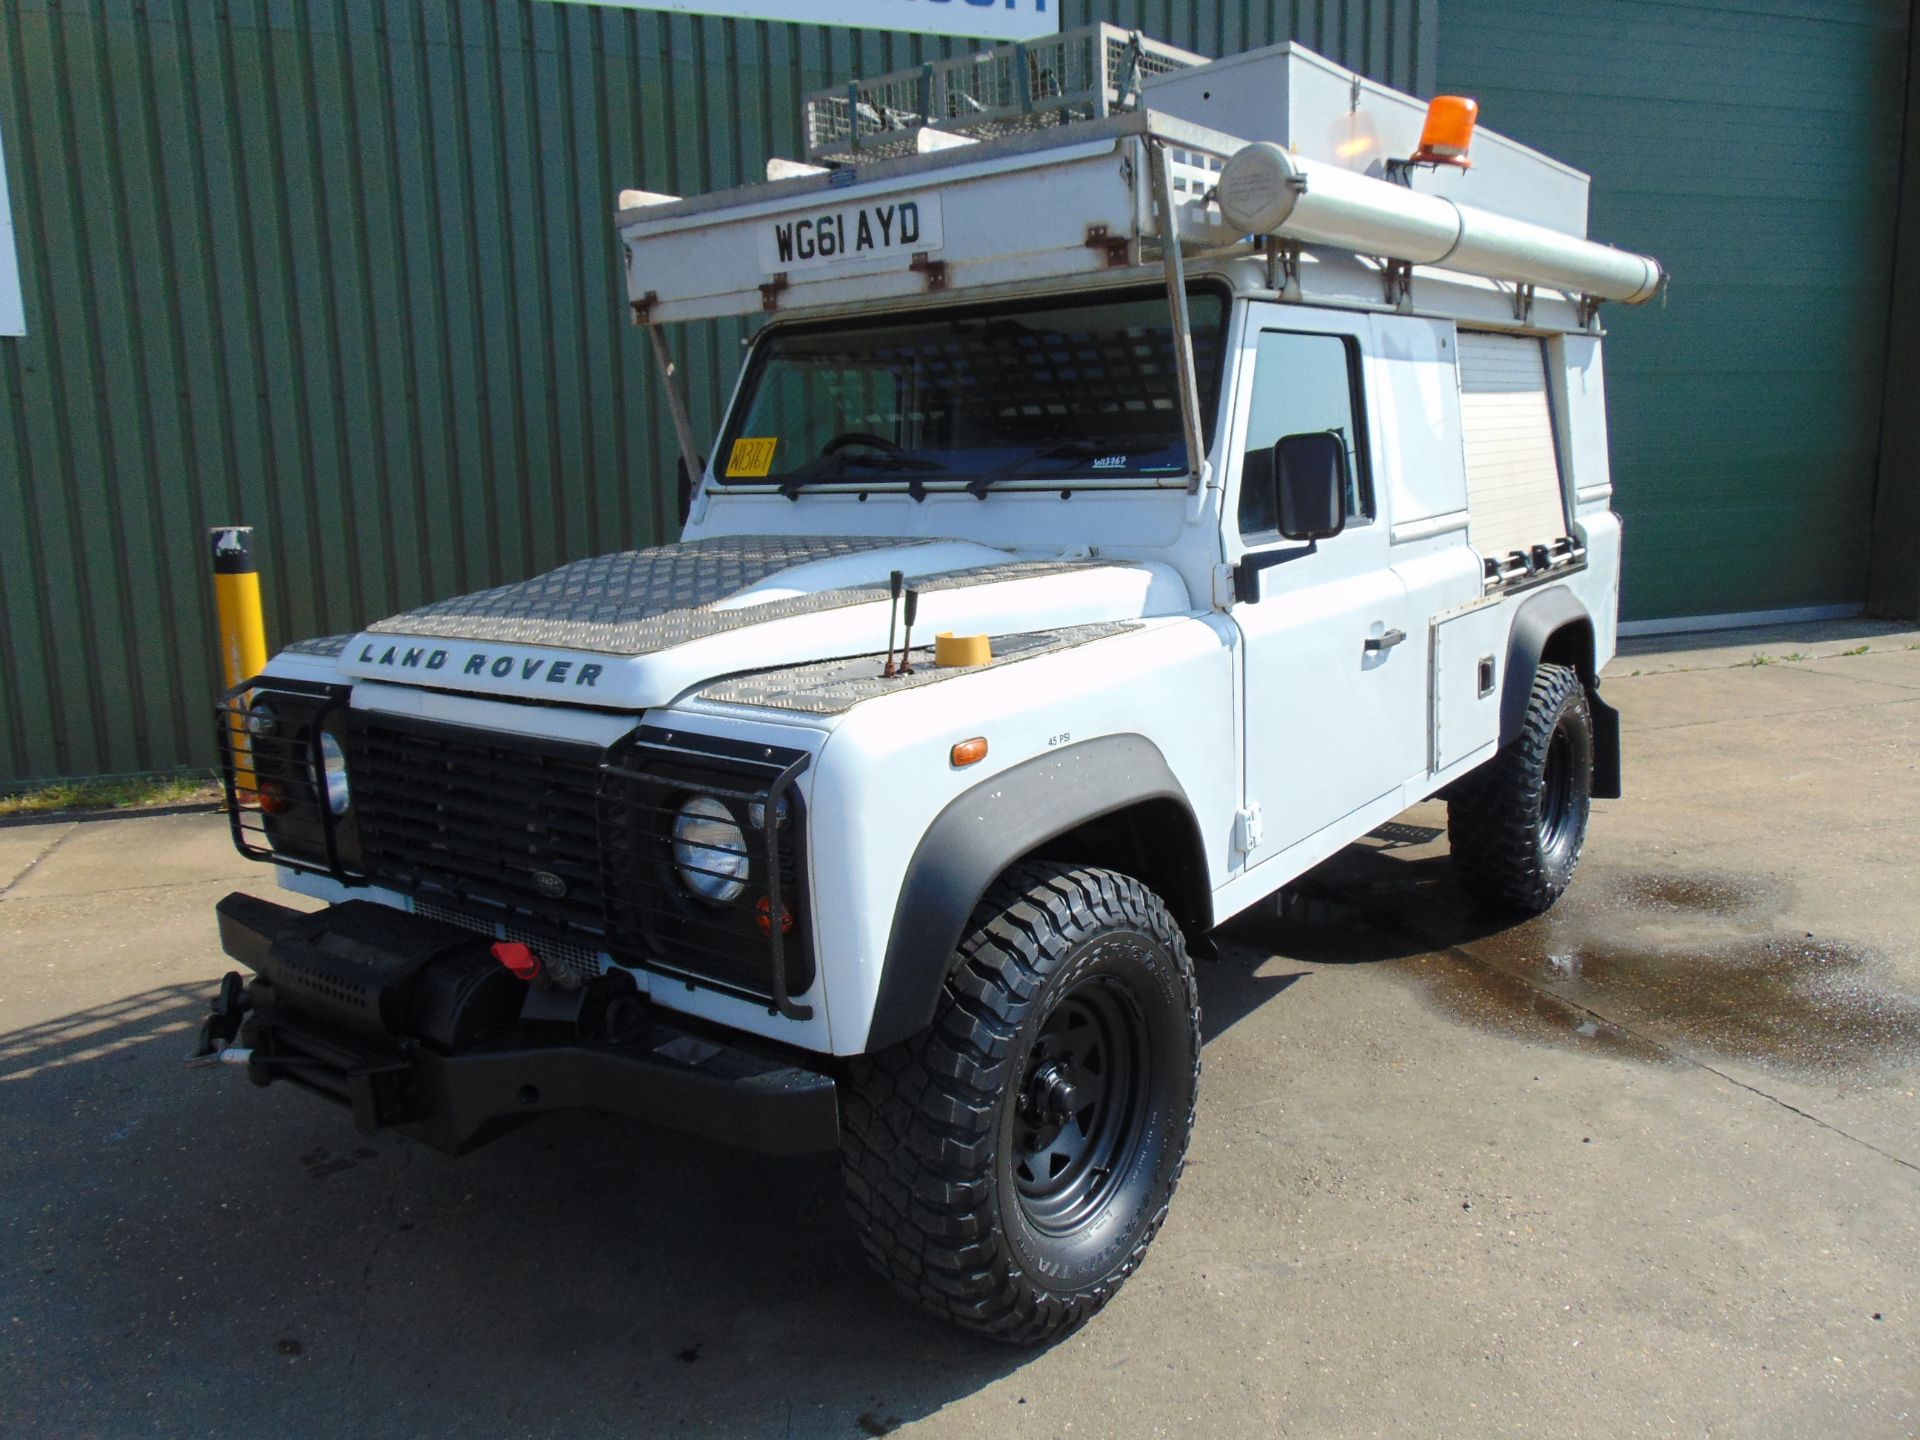 2011 Land Rover Defender 110 Puma hardtop 4x4 Utility vehicle (mobile workshop) with hydraulic winch - Image 3 of 53